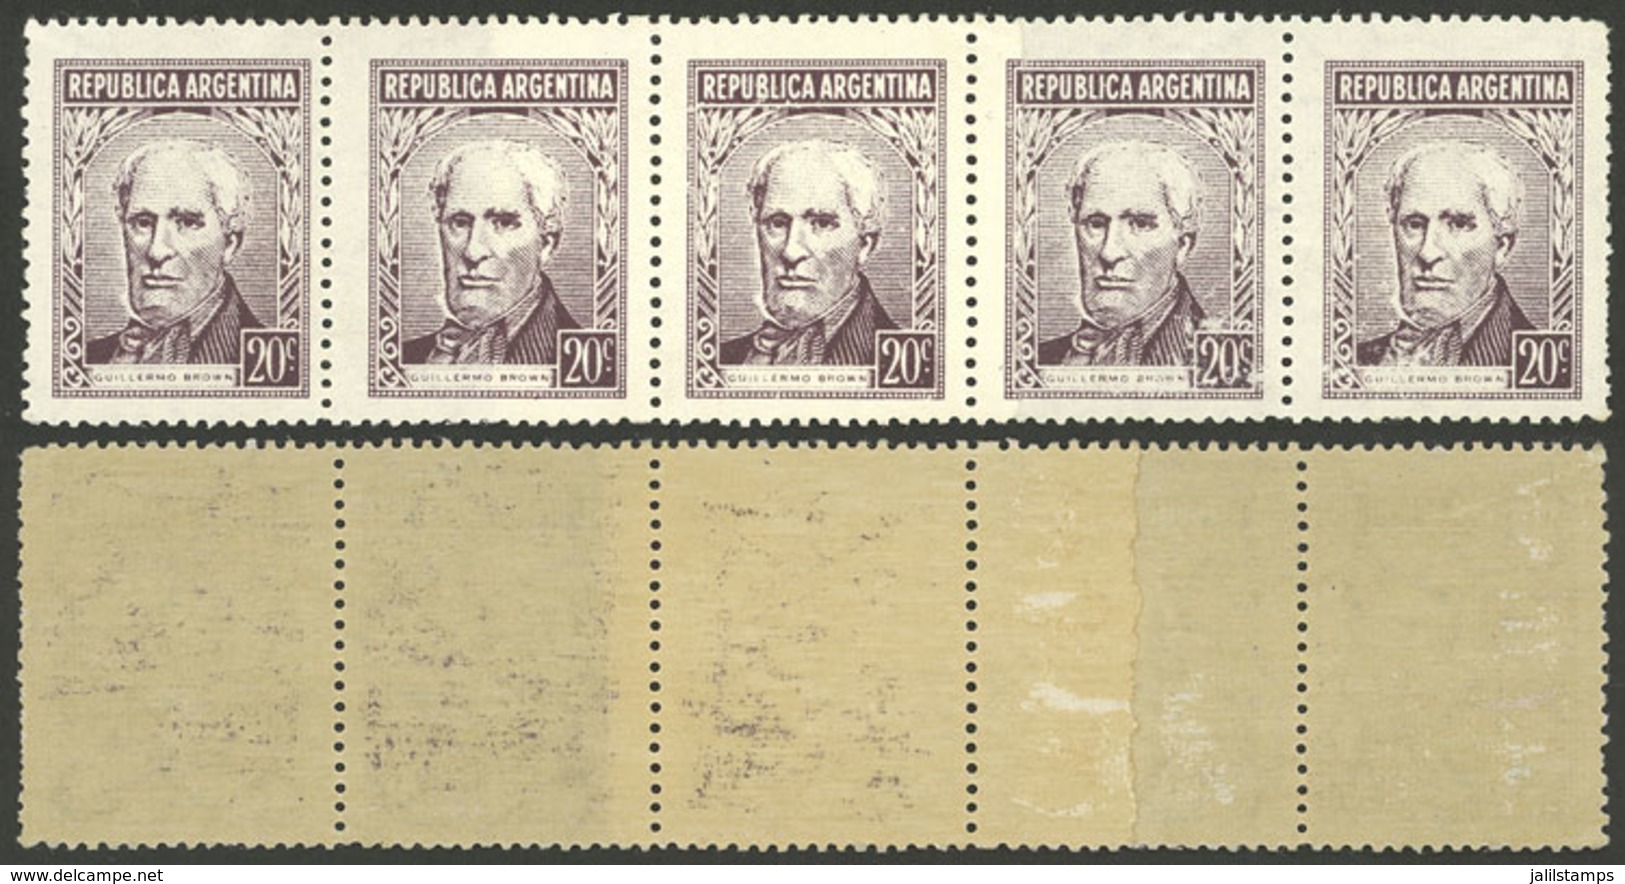 ARGENTINA: GJ.1038, Strip Of 5 With END-OF-ROLL DOUBLE PAPER Variety, VF Quality! - Nuevos